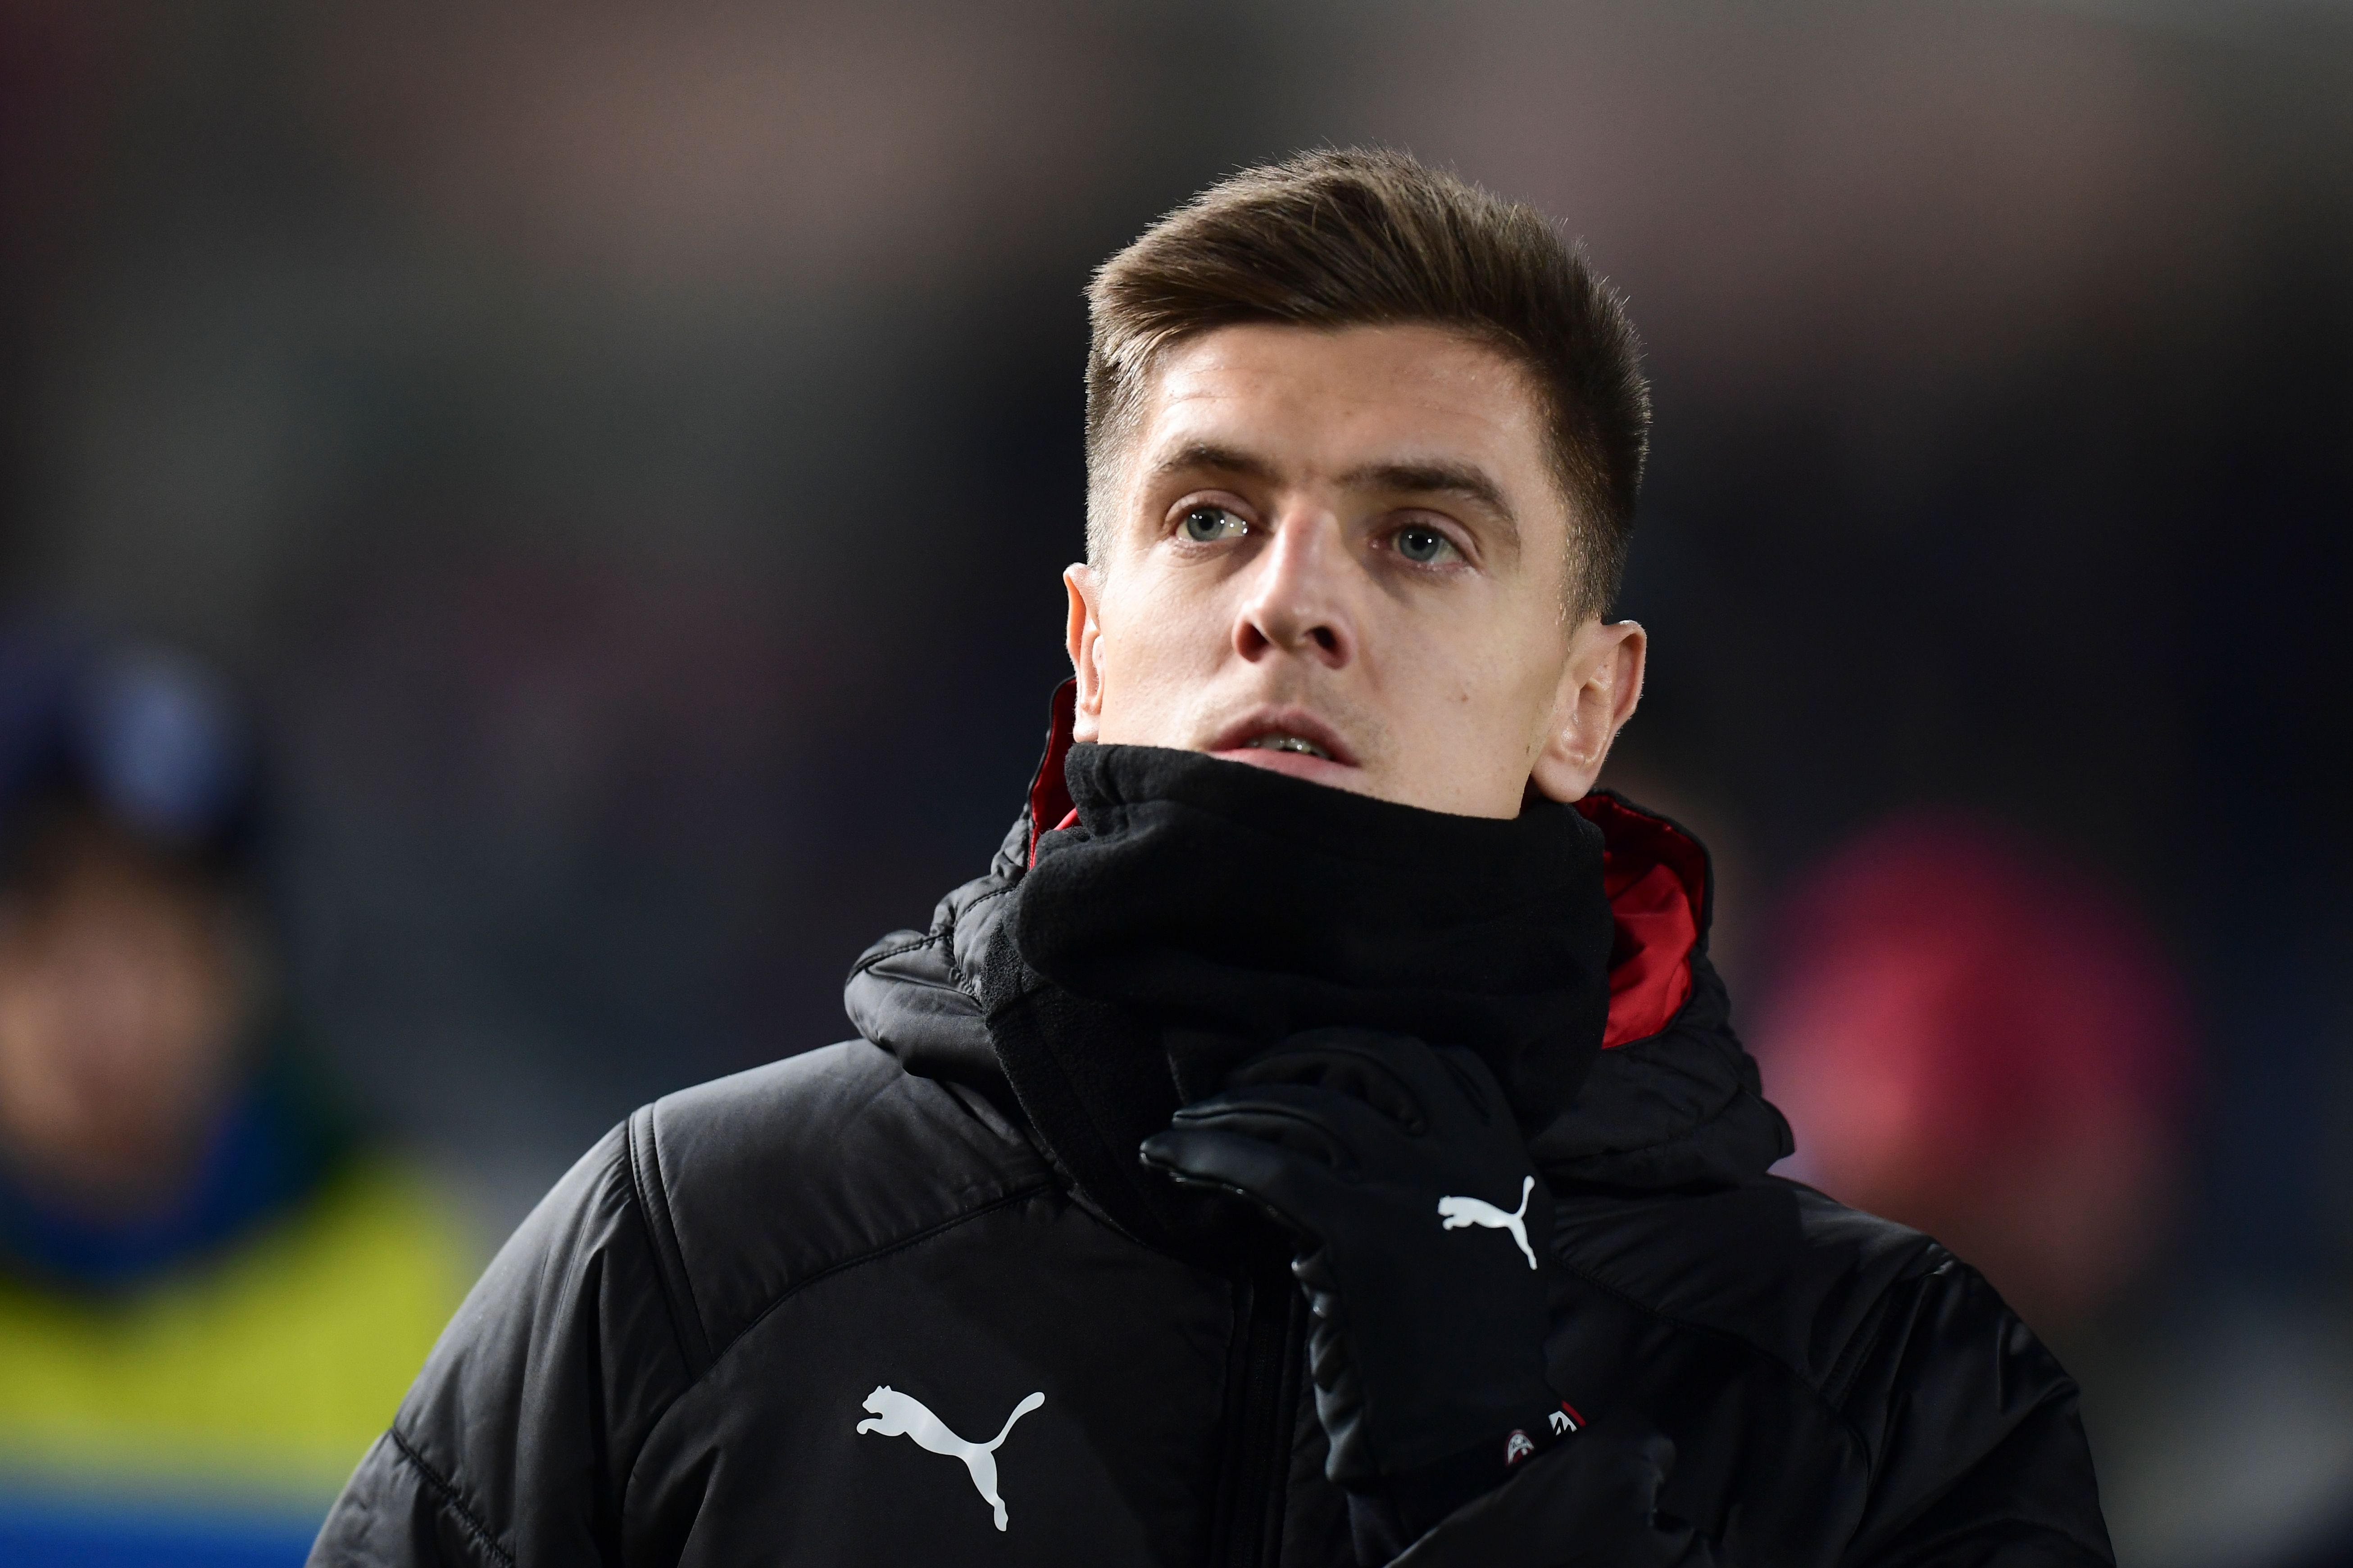 Krzysztof Piatek misses out for Poland due to an injury. (Photo by Miguel Medina/AFP via Getty Images)